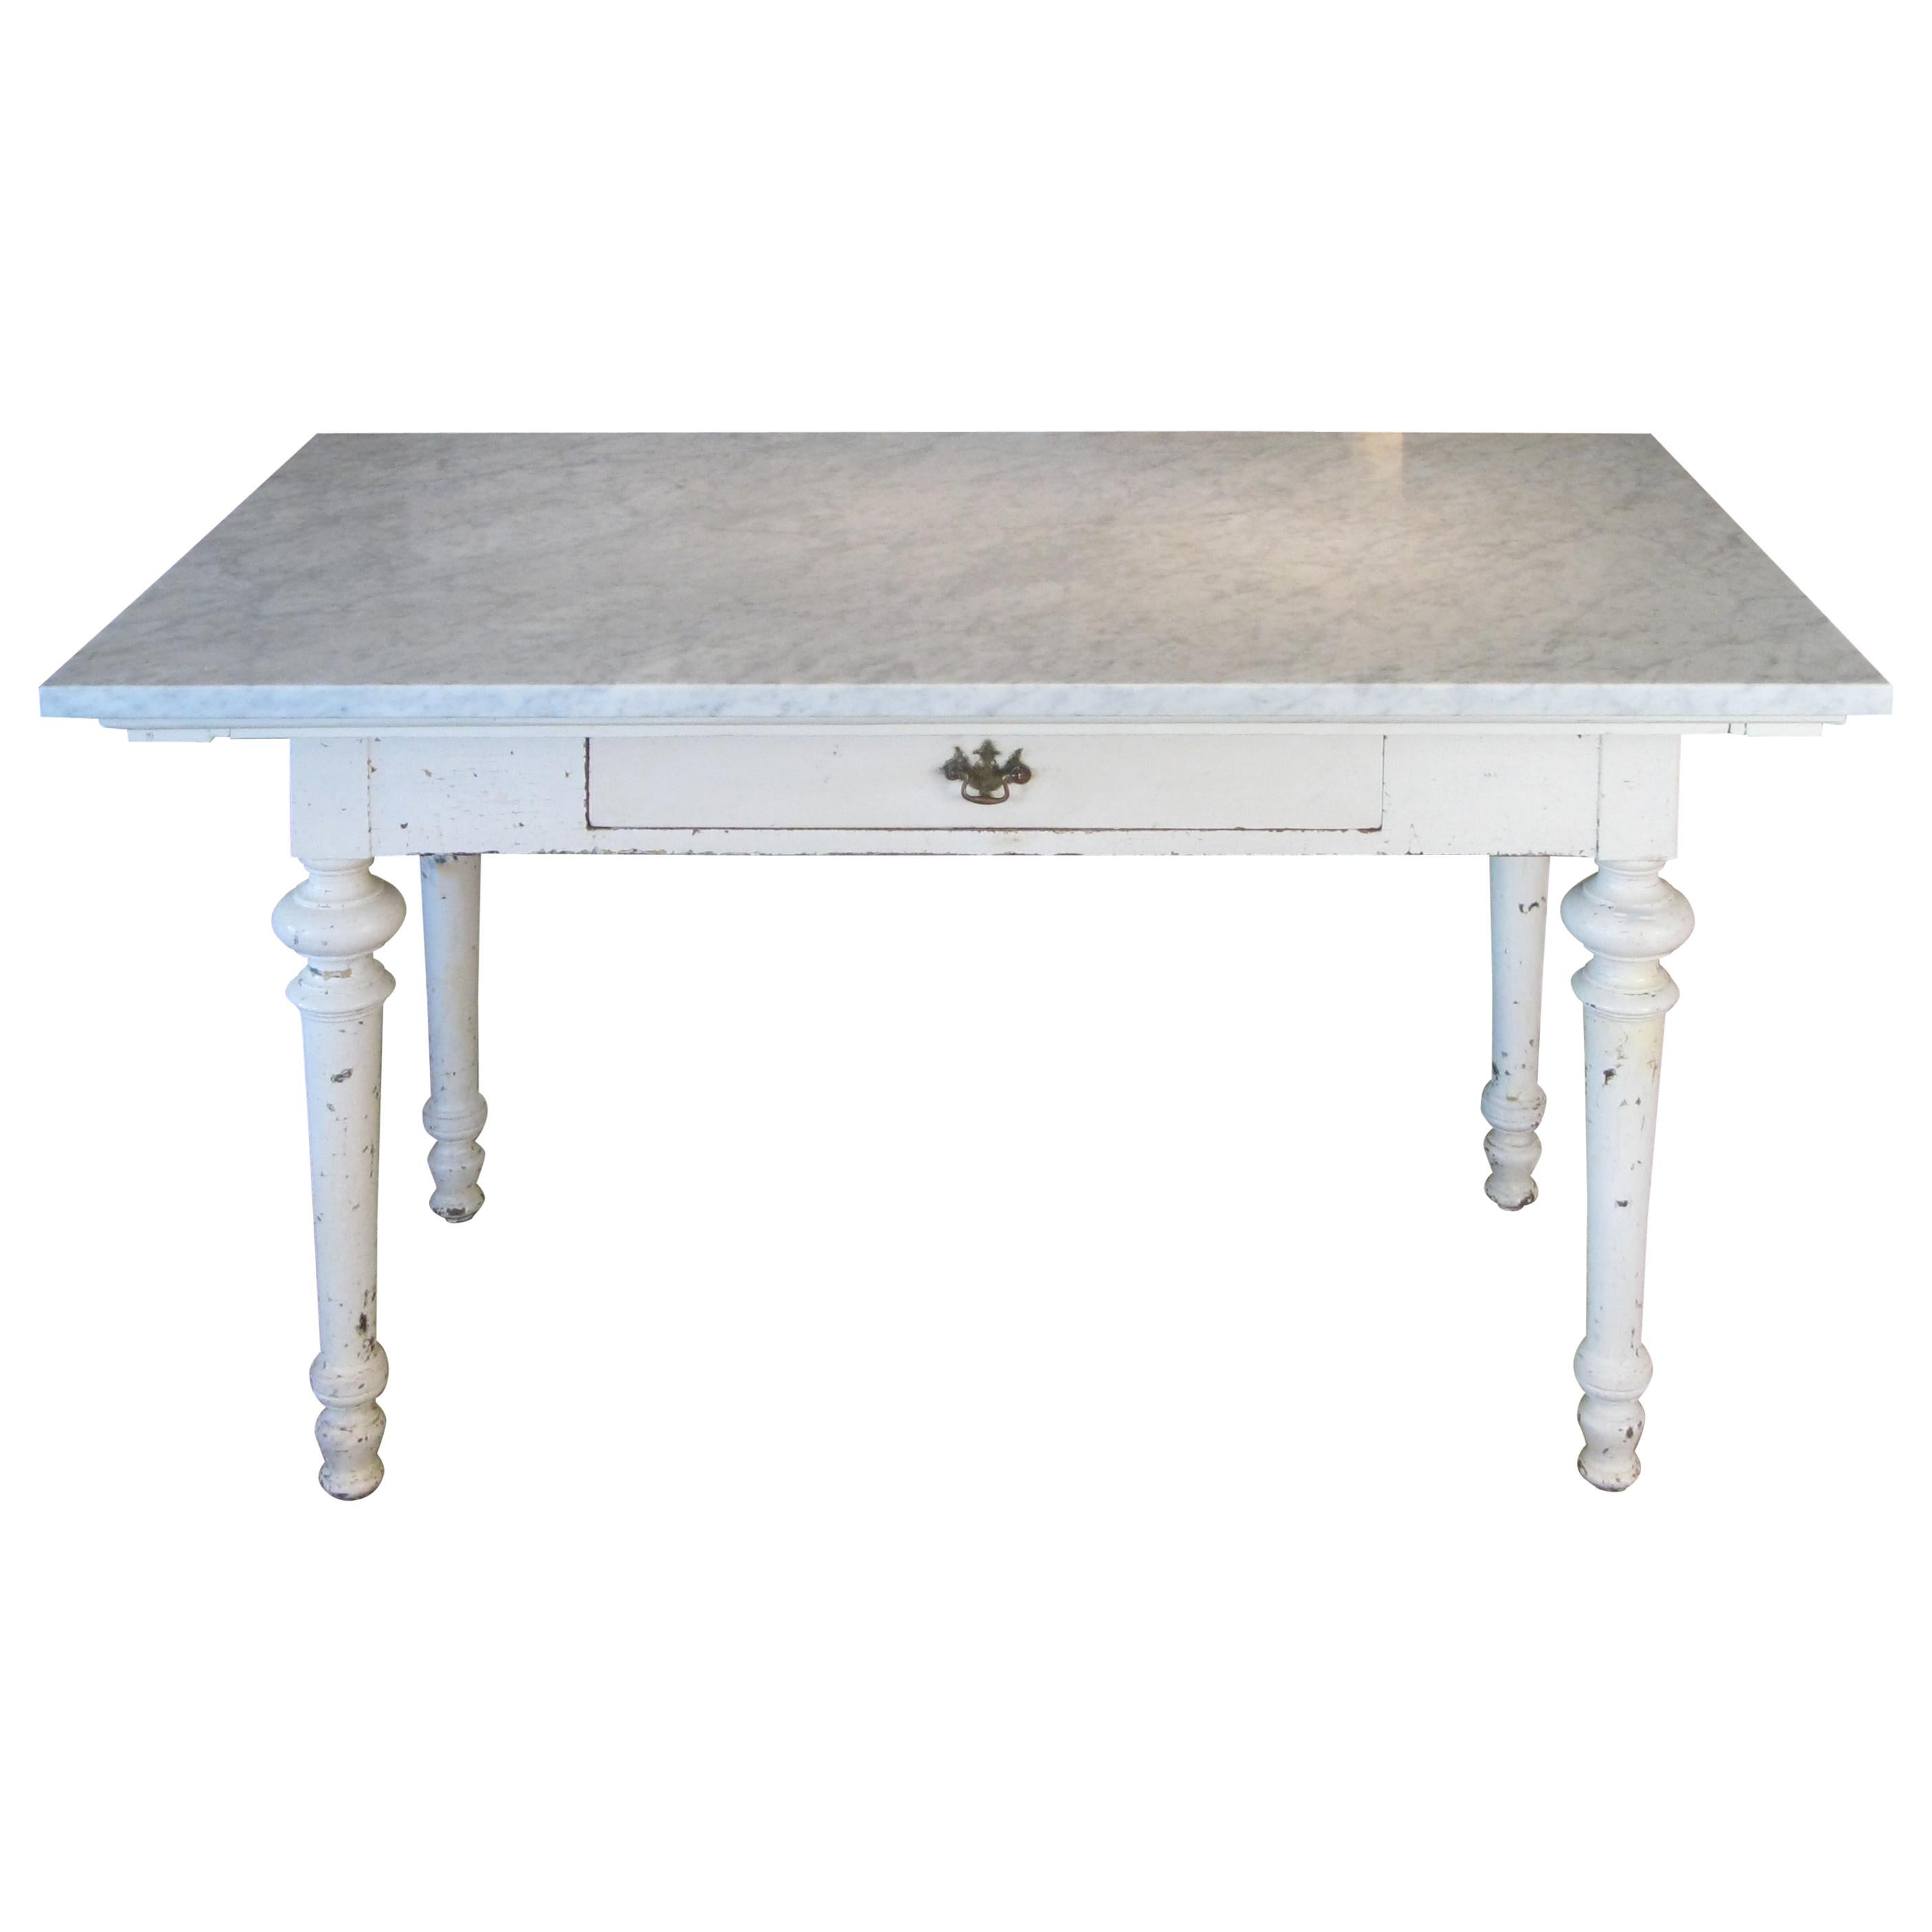 Antique 19th Century Refectory Table with Venatino Marble Top